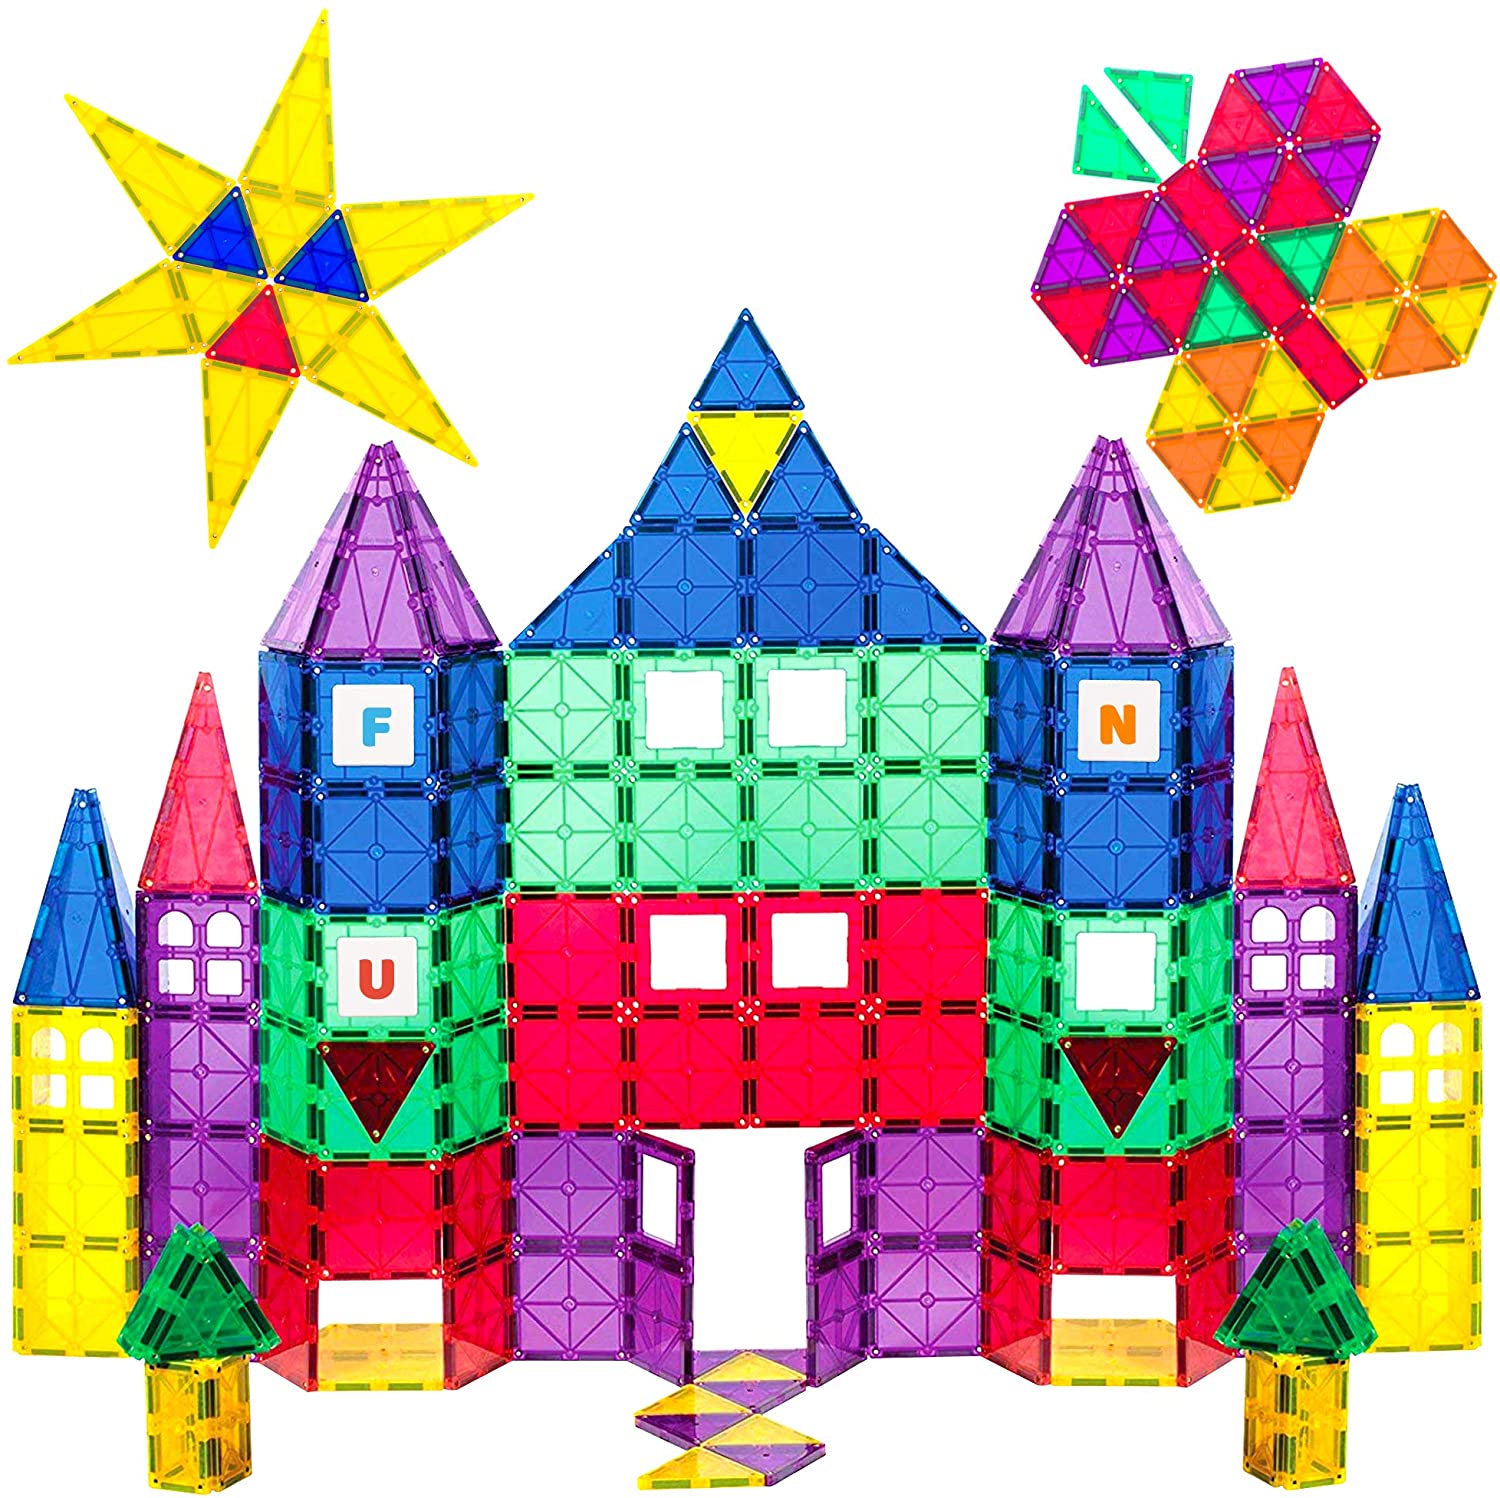 100-Piece Playmags 3D Magnetic Toy Blocks $40 + Free Shipping